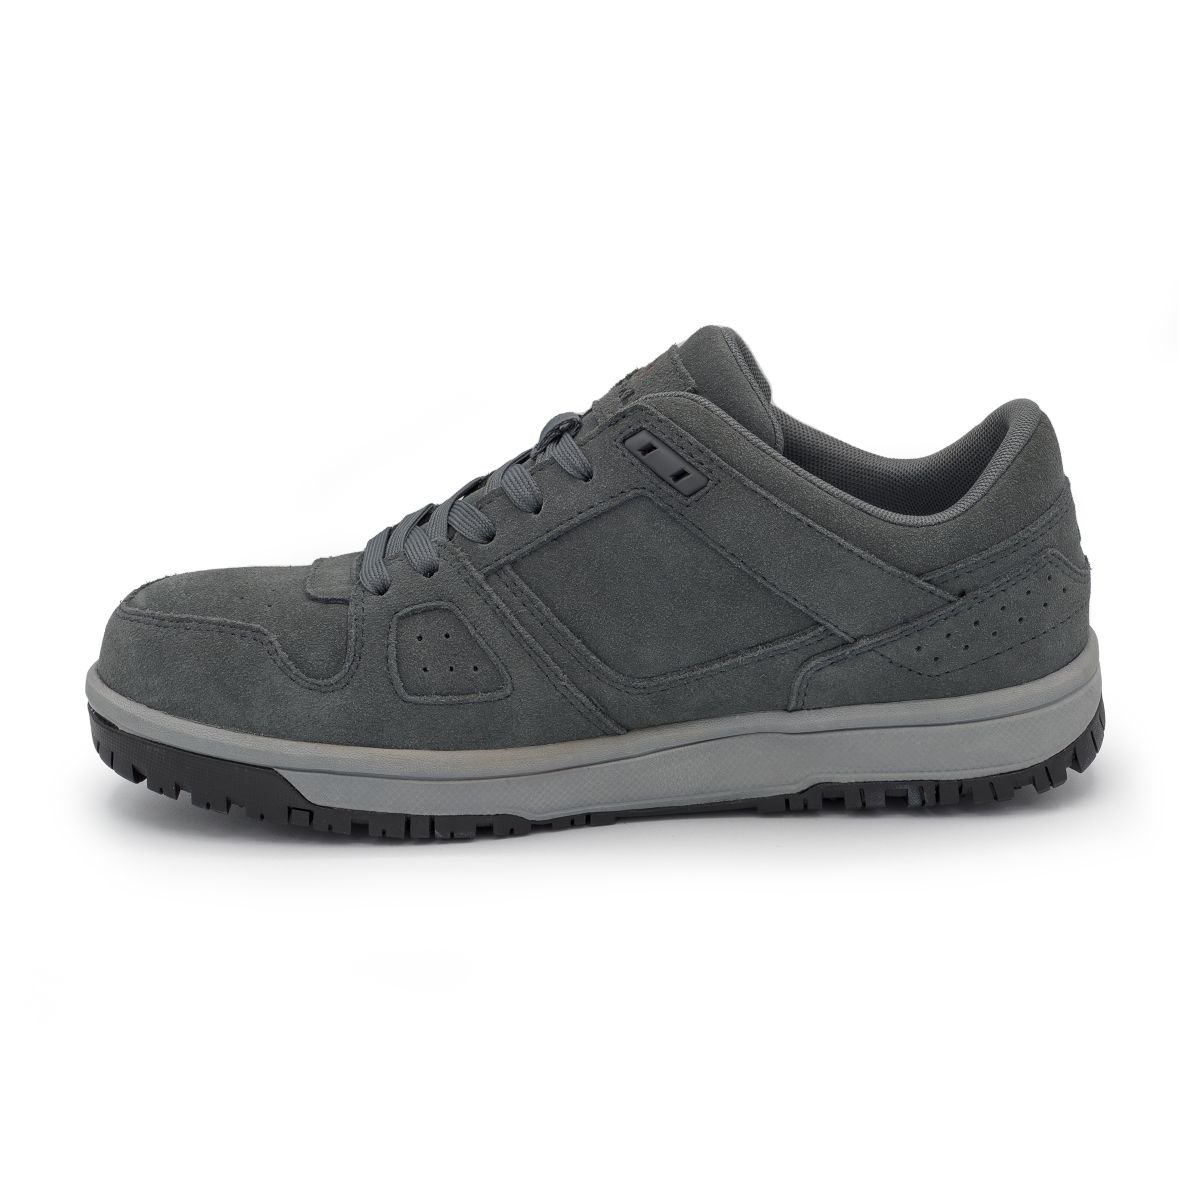 AIRWALK SAFETY Men's Mongo Composite Toe EH Work Shoe Charcoal/Grey - AW6301 CHARCOAL/GRAY - CHARCOAL/GRAY, 8.5-M